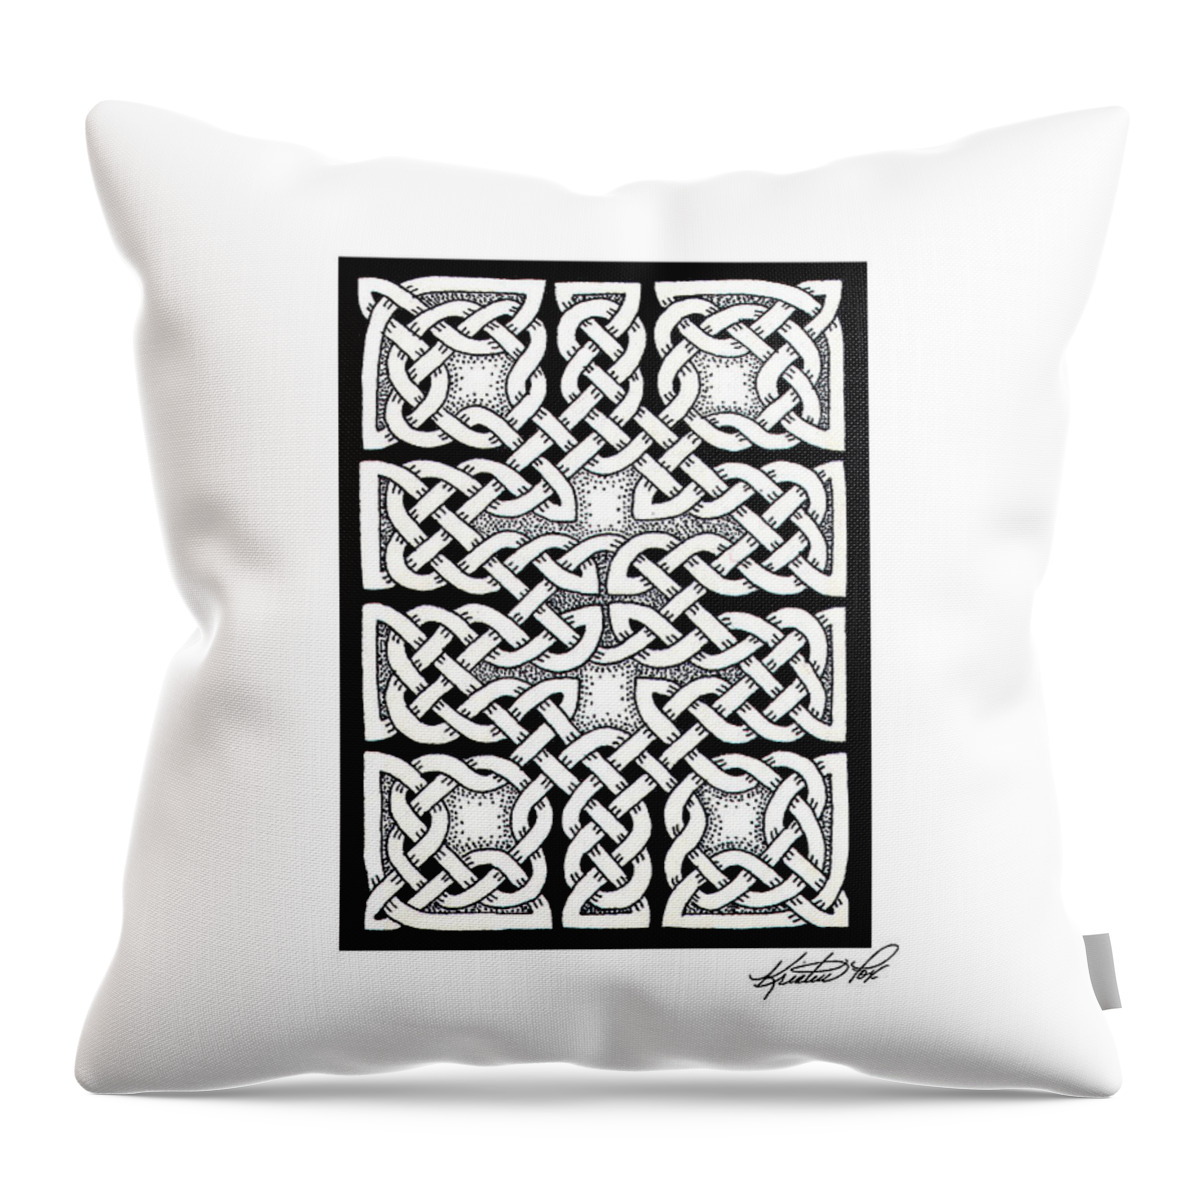 Artoffoxvox Throw Pillow featuring the drawing Celtic Knotwork Ten Rooms by Kristen Fox